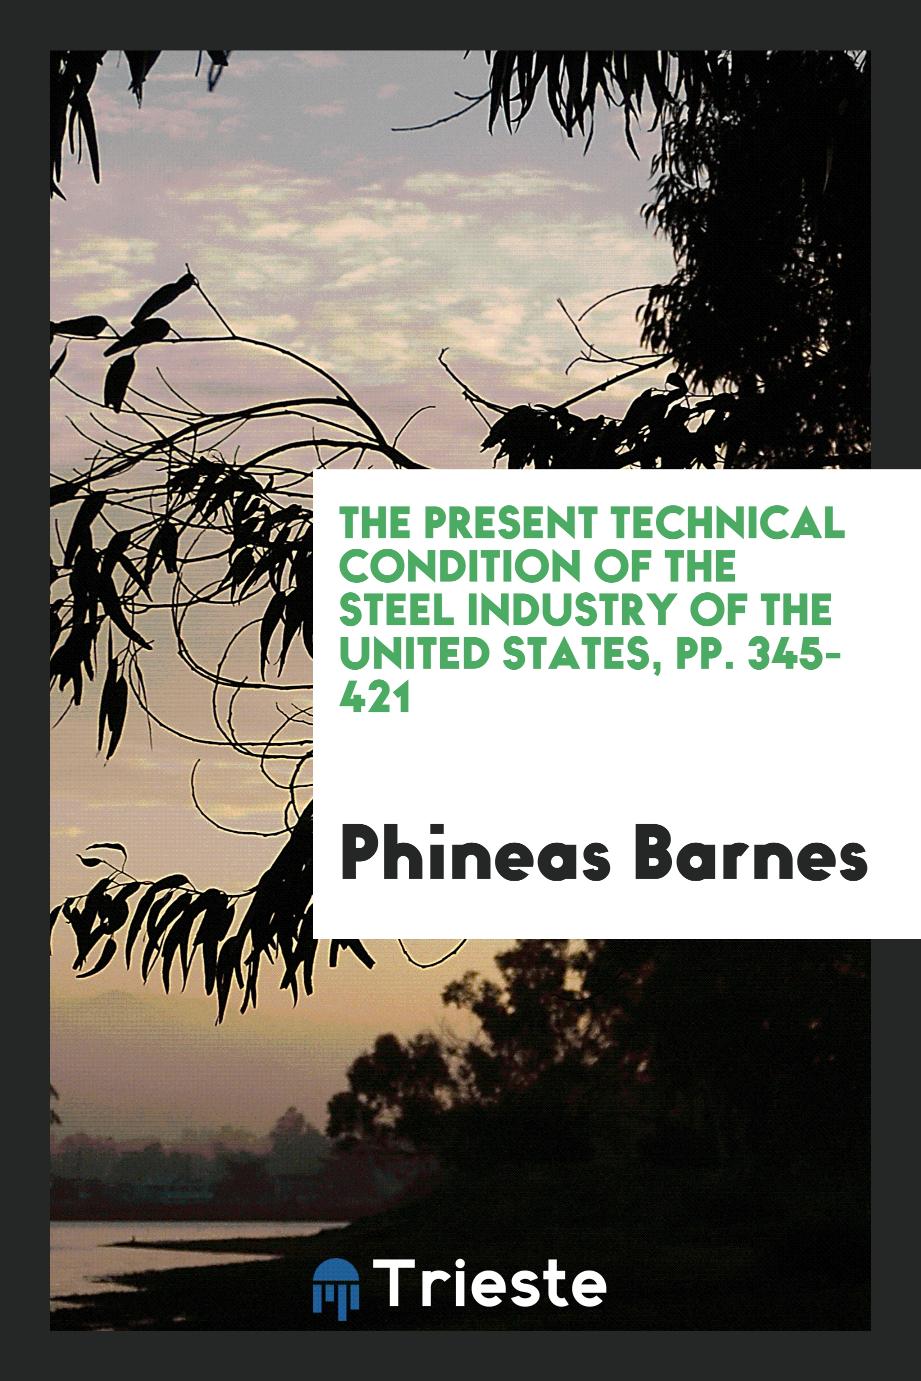 The Present Technical Condition of the Steel Industry of the United States, pp. 345-421